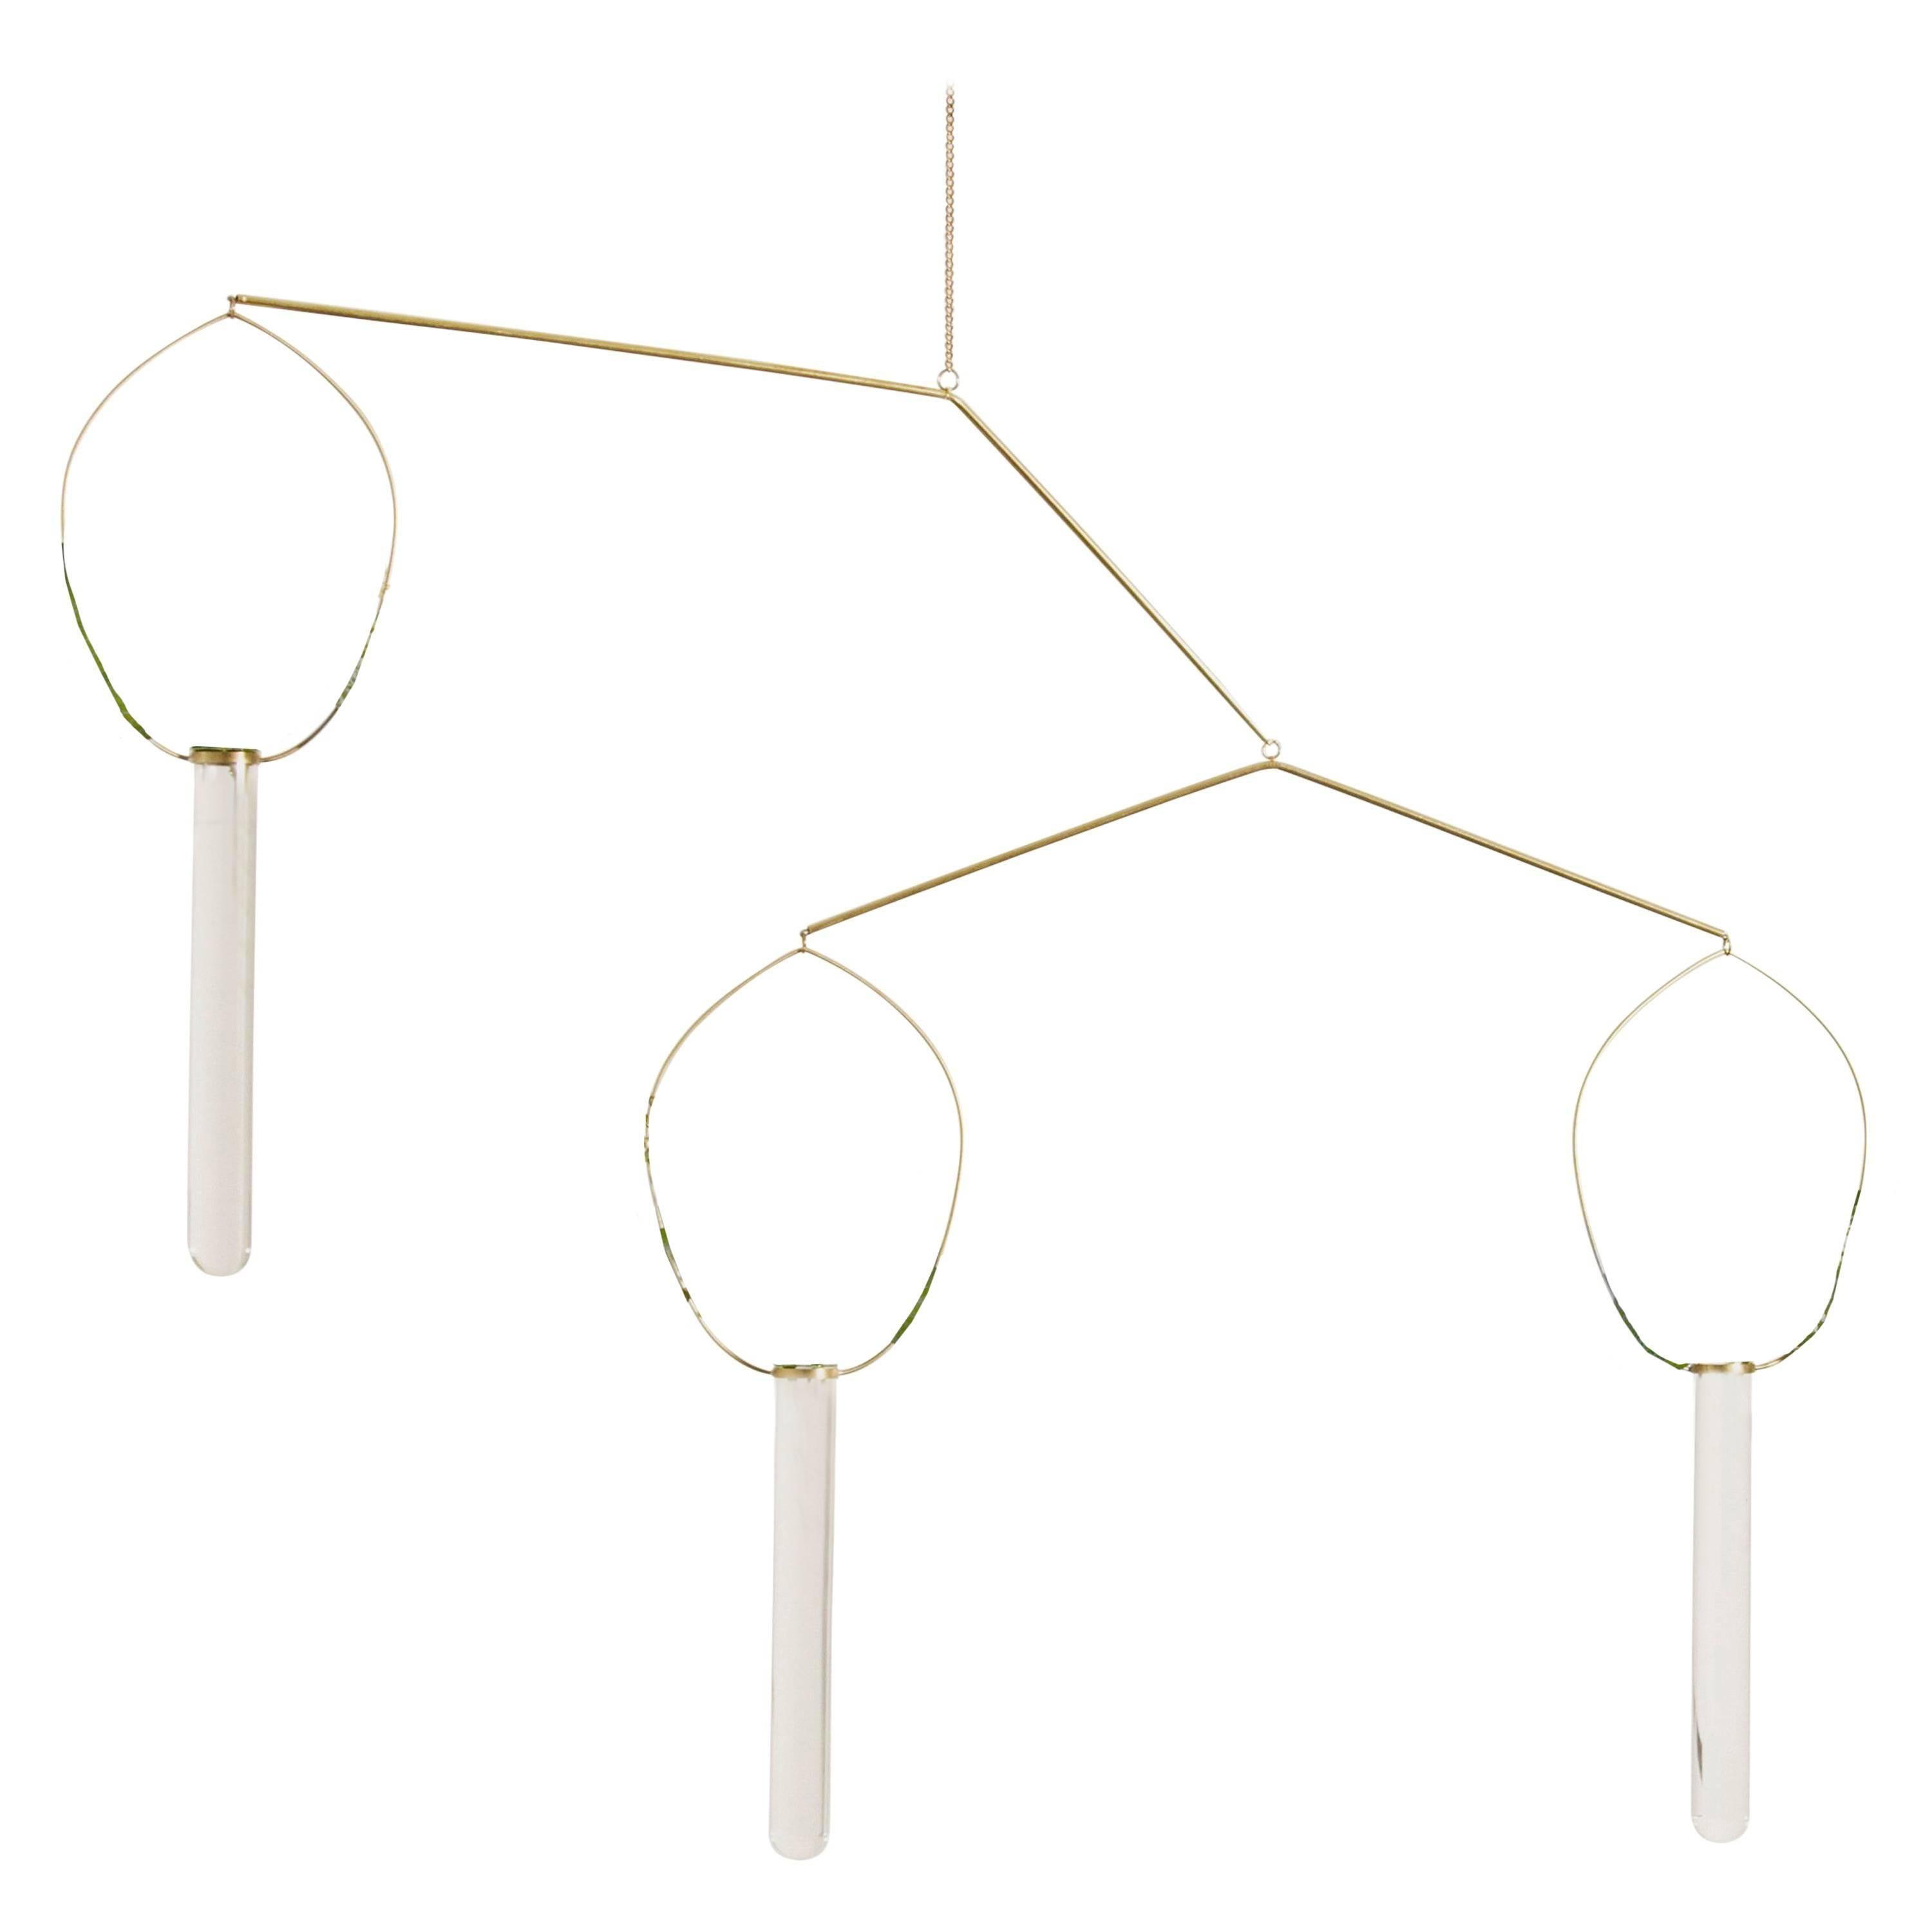 Eden Trio Brass Floating Vases by Agustina Bottoni For Sale